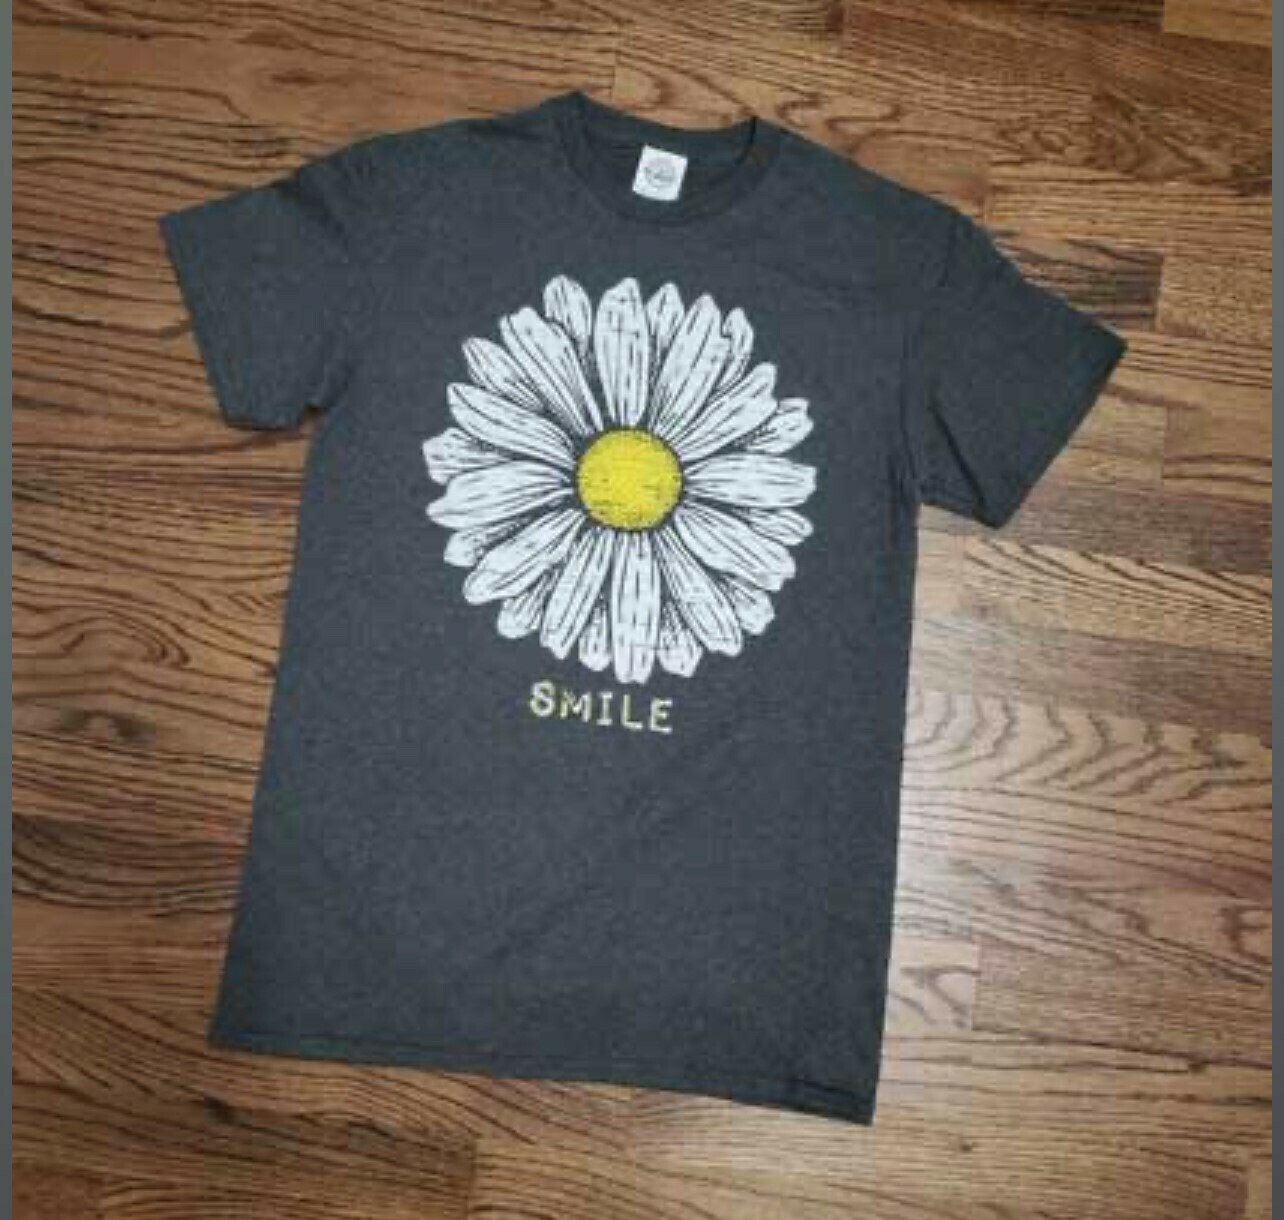 DAISY - SMILE, Sizes: Small